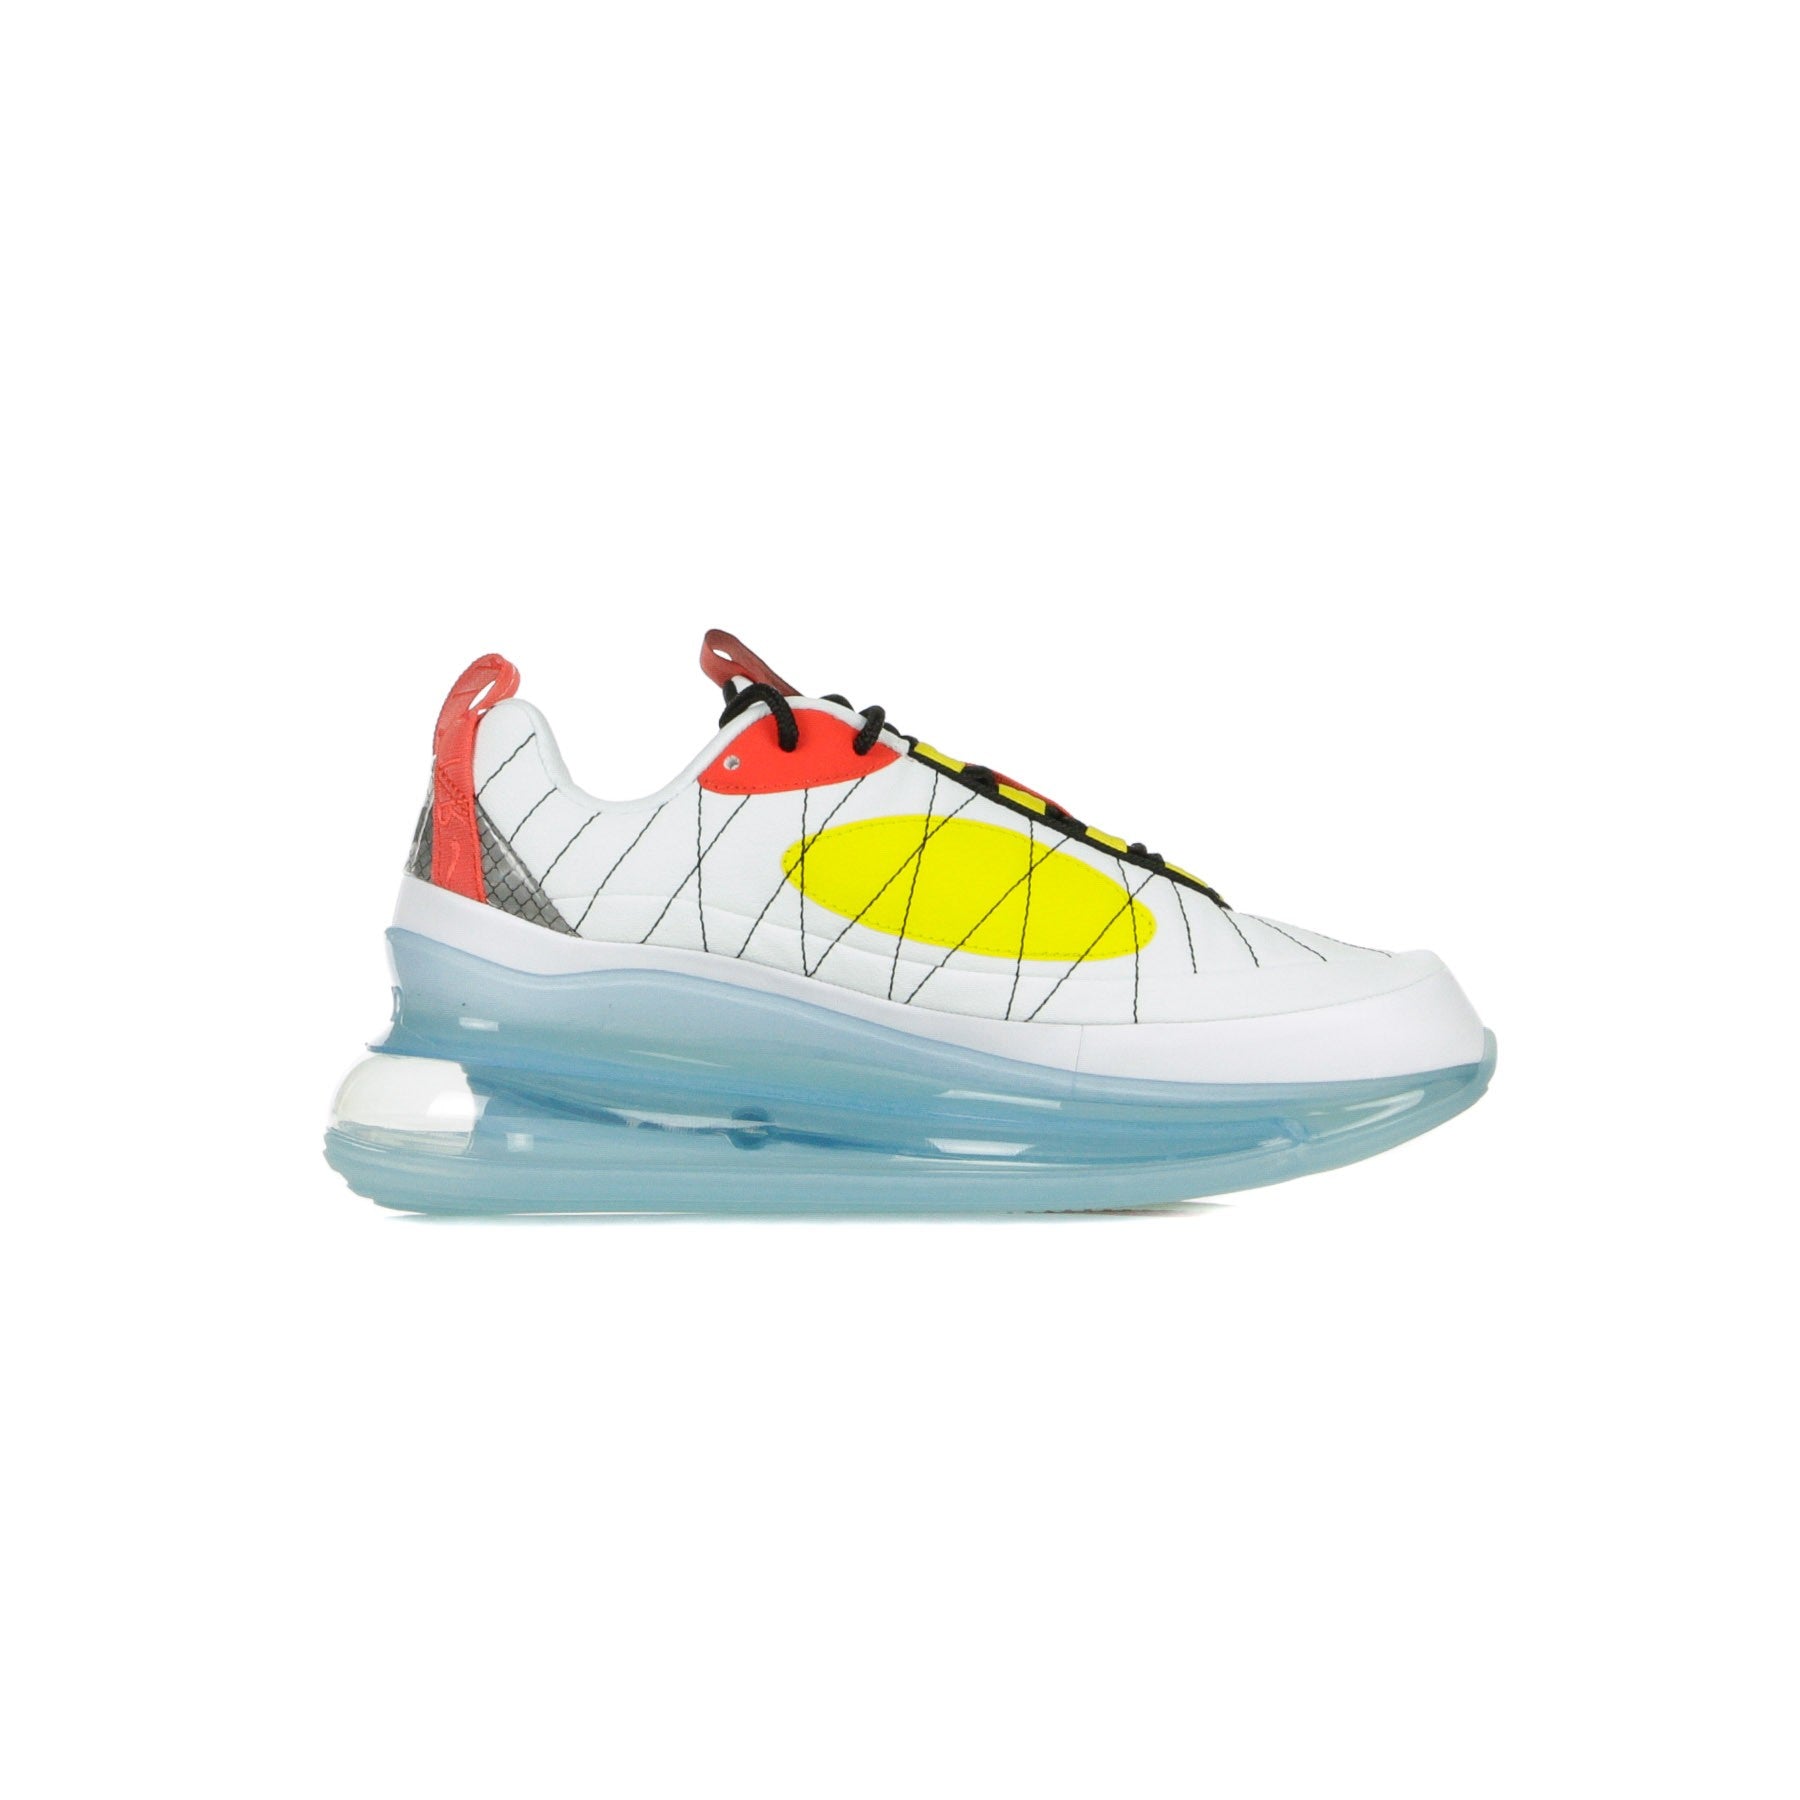 Low Men's Shoe Mx-720-818 White/black/speed Yellow/chile Red